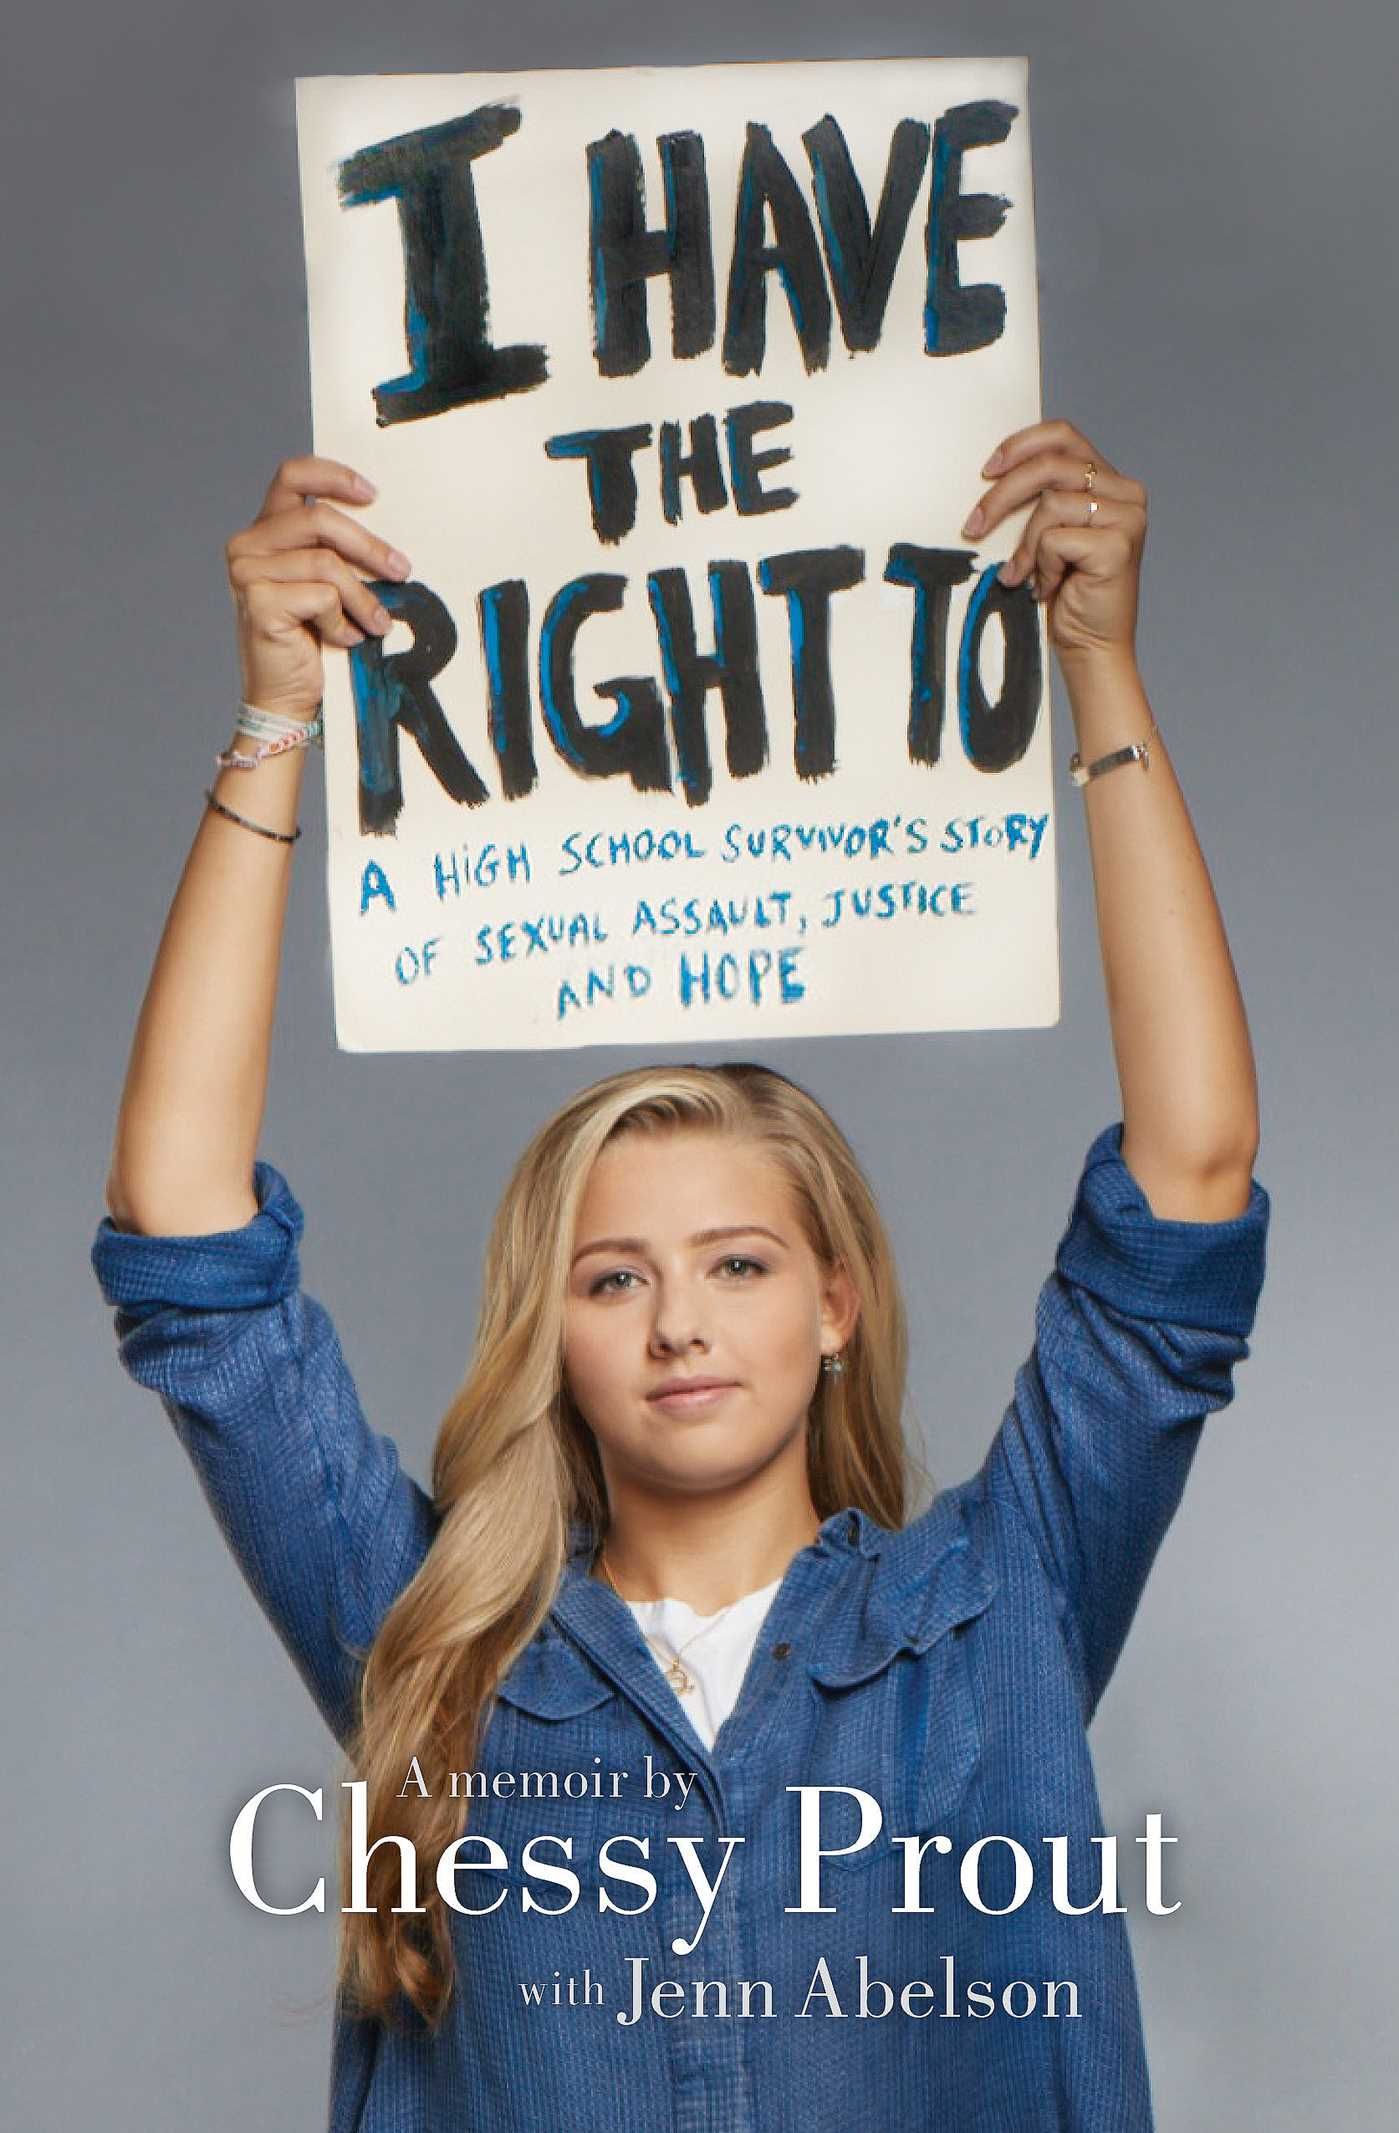 chessy prout book